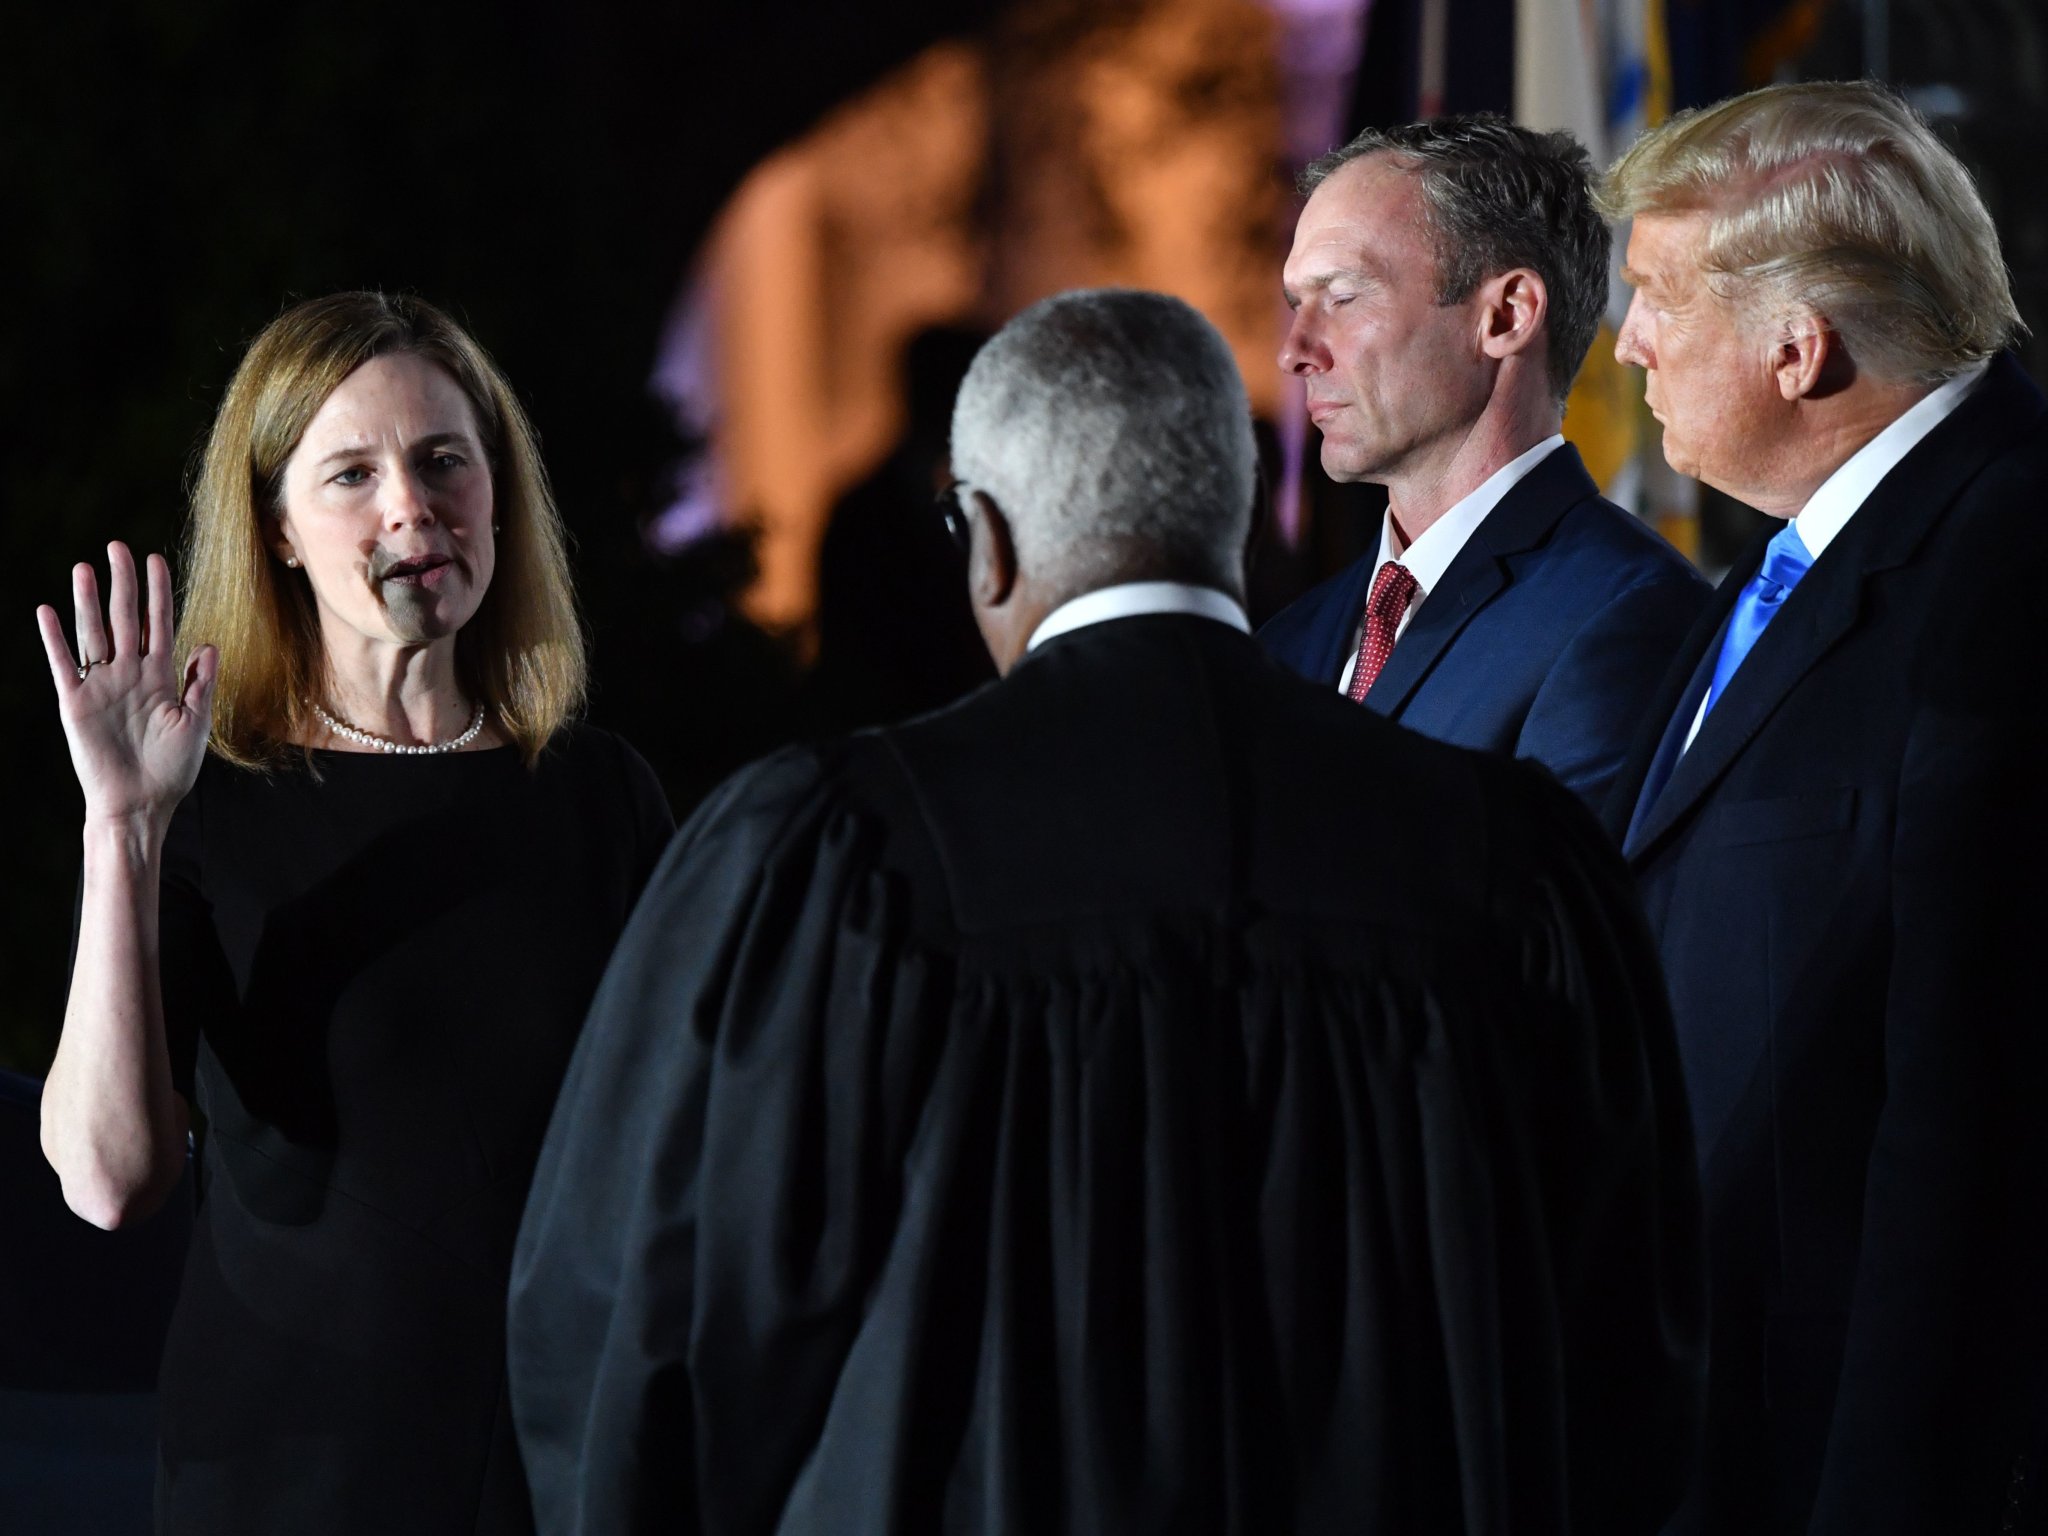 Amy Coney Barrett Confirmed To Supreme Court, Takes Constitutional Oath